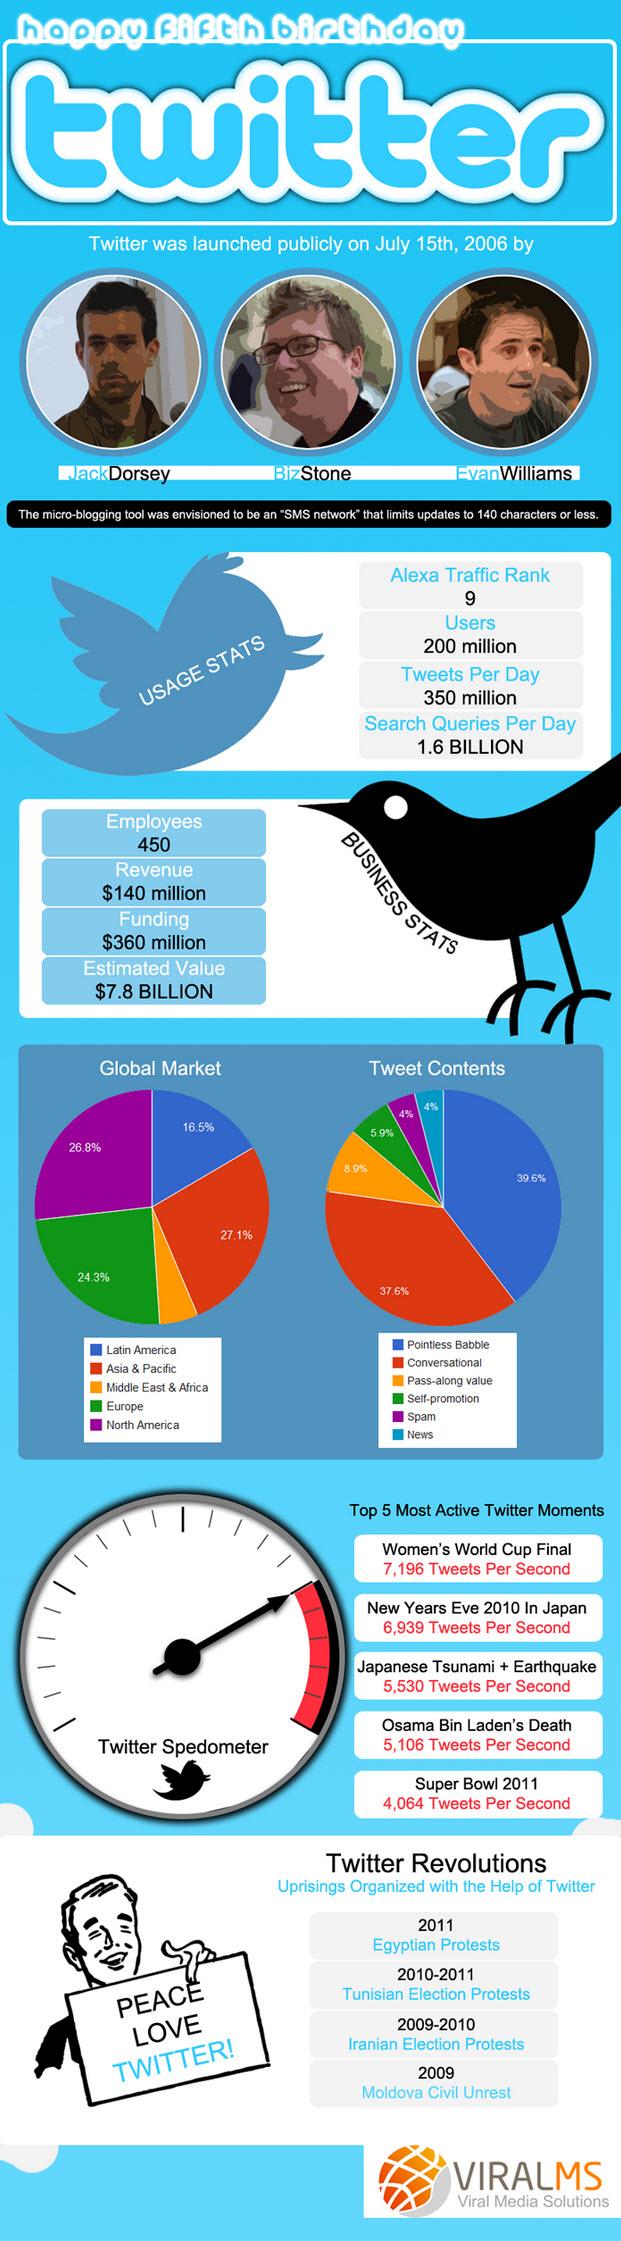 Twitter-Facts-Figures-Statistics-about-growth